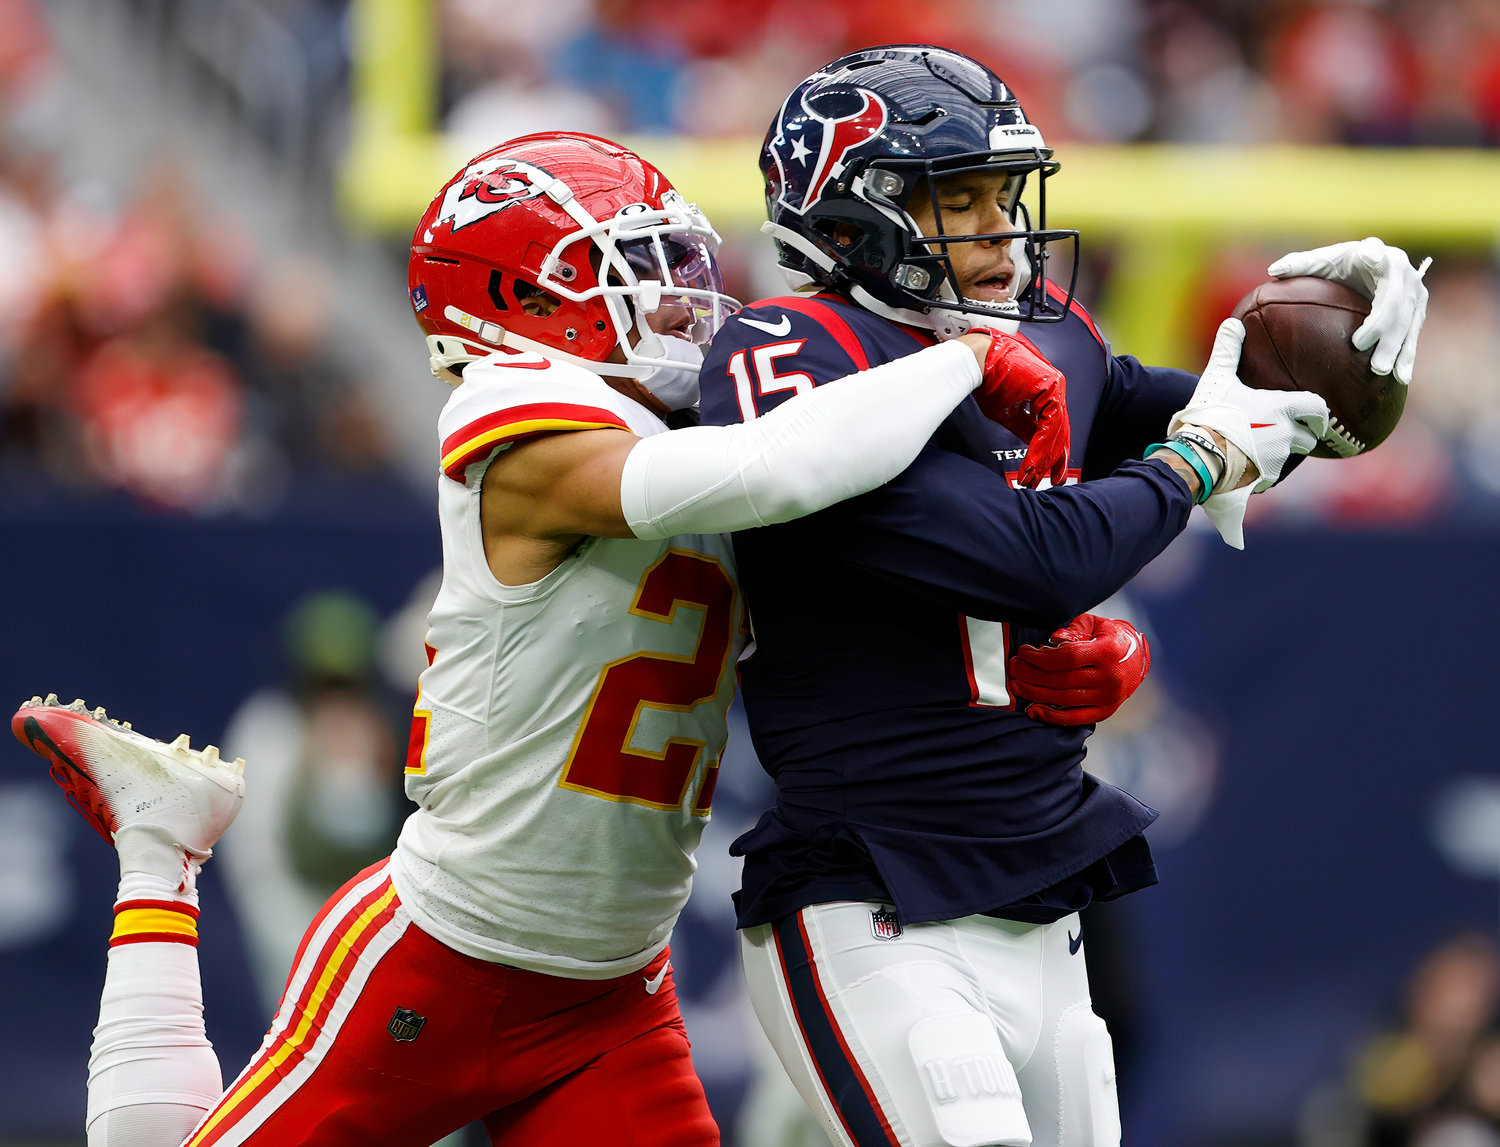 Houston Texans wide receiver Chris Moore (15) brings in a 34-yard pass over Kansas City Chiefs cornerback Trent McDuffie (21) during an NFL game between the Texans and the Chiefs on Dec. 18, 2022, in Houston. The Chiefs won, 30-24, in overtime.